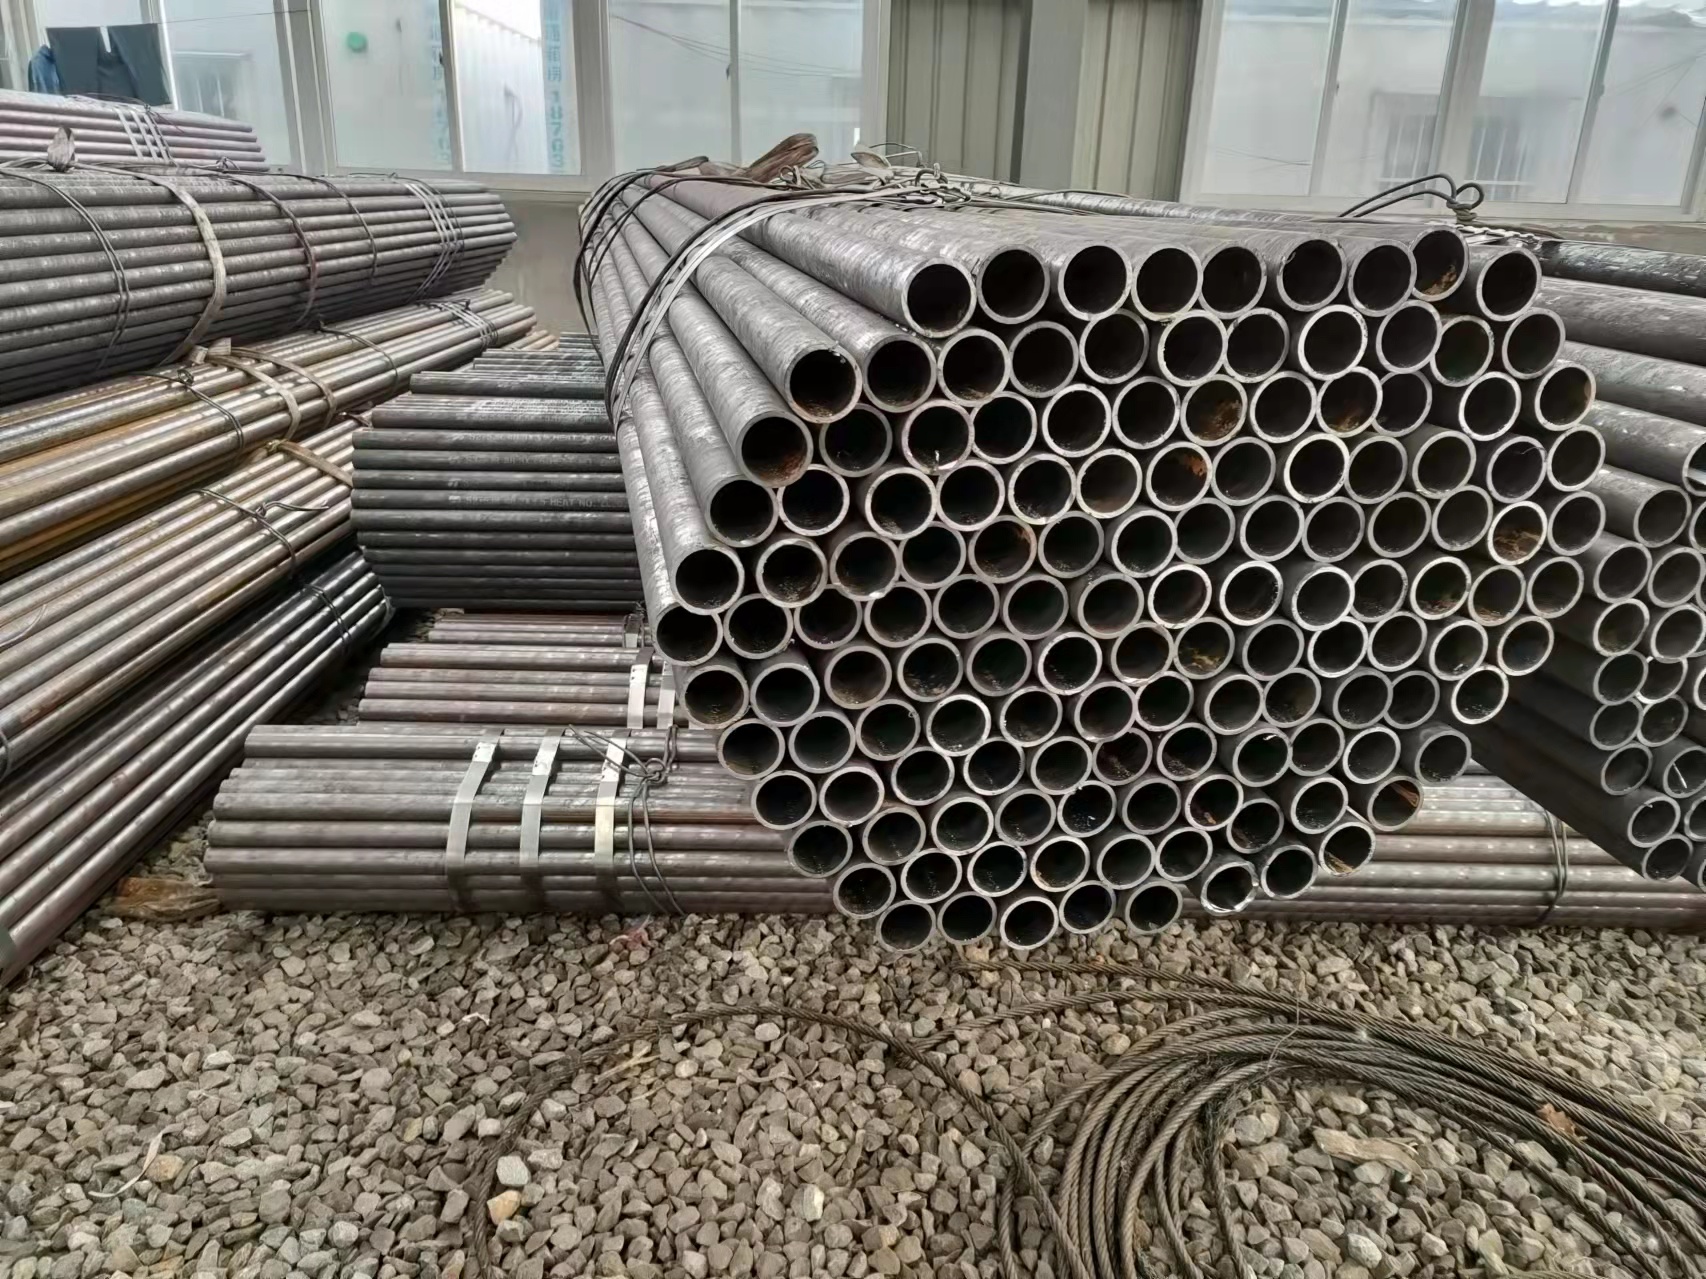 Factory Price Selling Seamless Steel Pipe And Tube Hot Sale High Quality Carbon Steel Seamless Pipe with Cheap Price